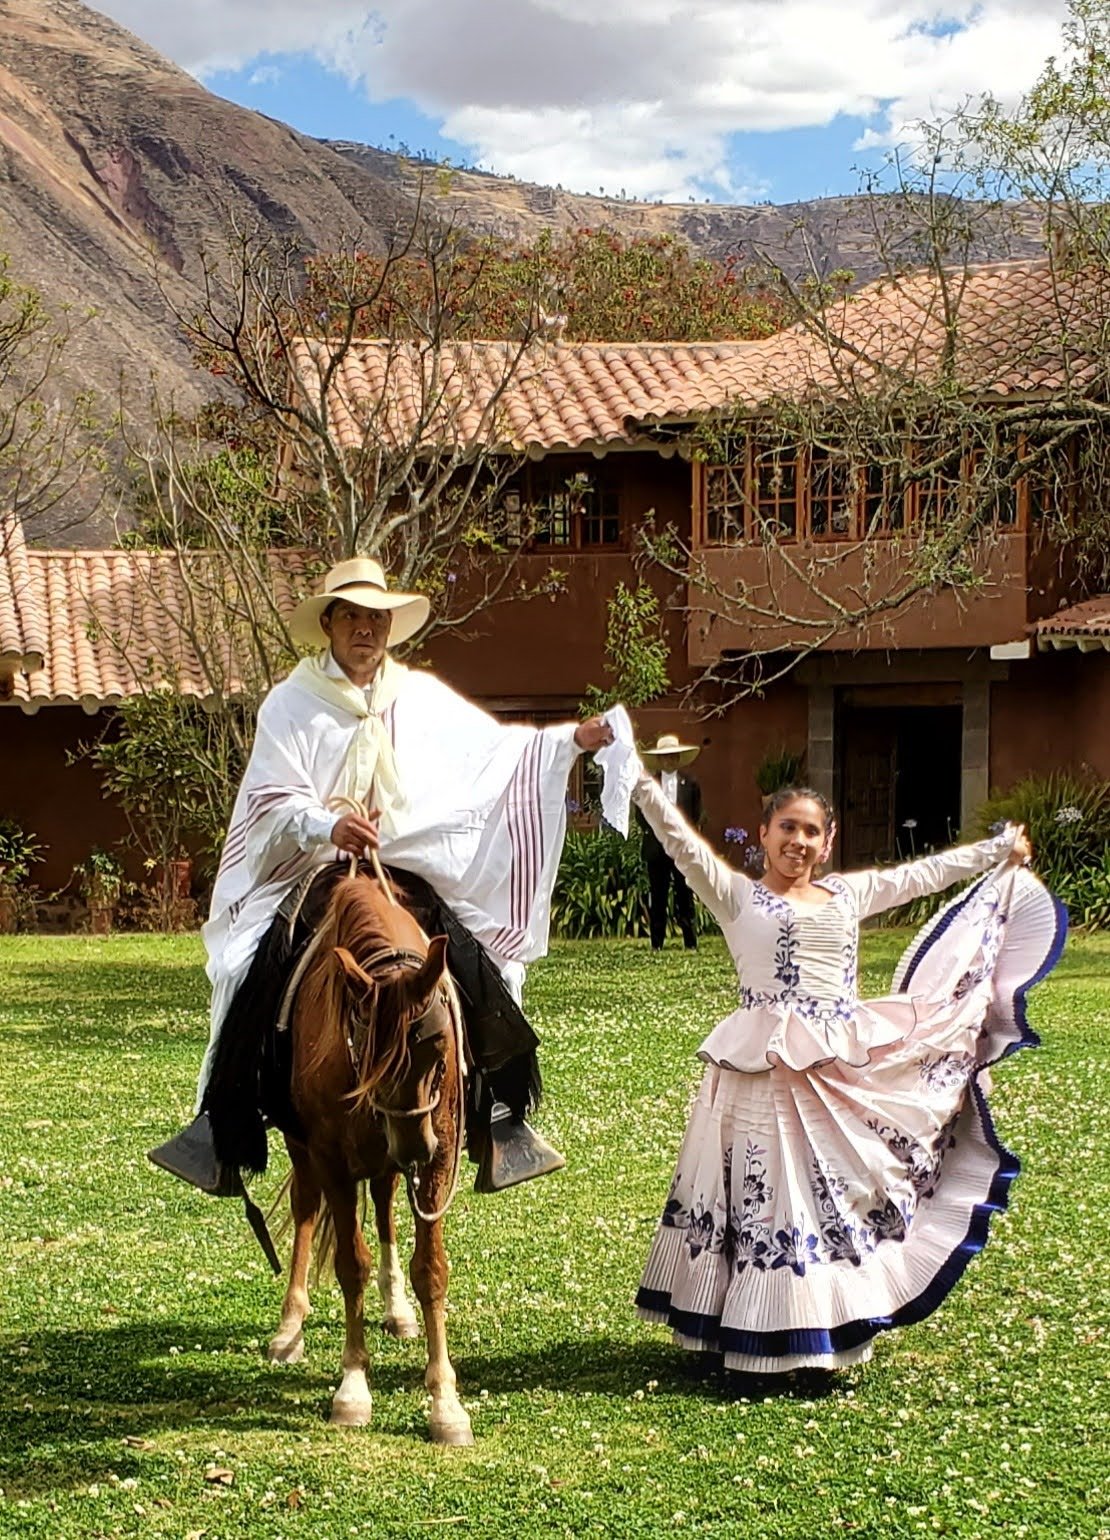 Peruvian Paso horses and traditional dancing in the Sacred Valley, Peru